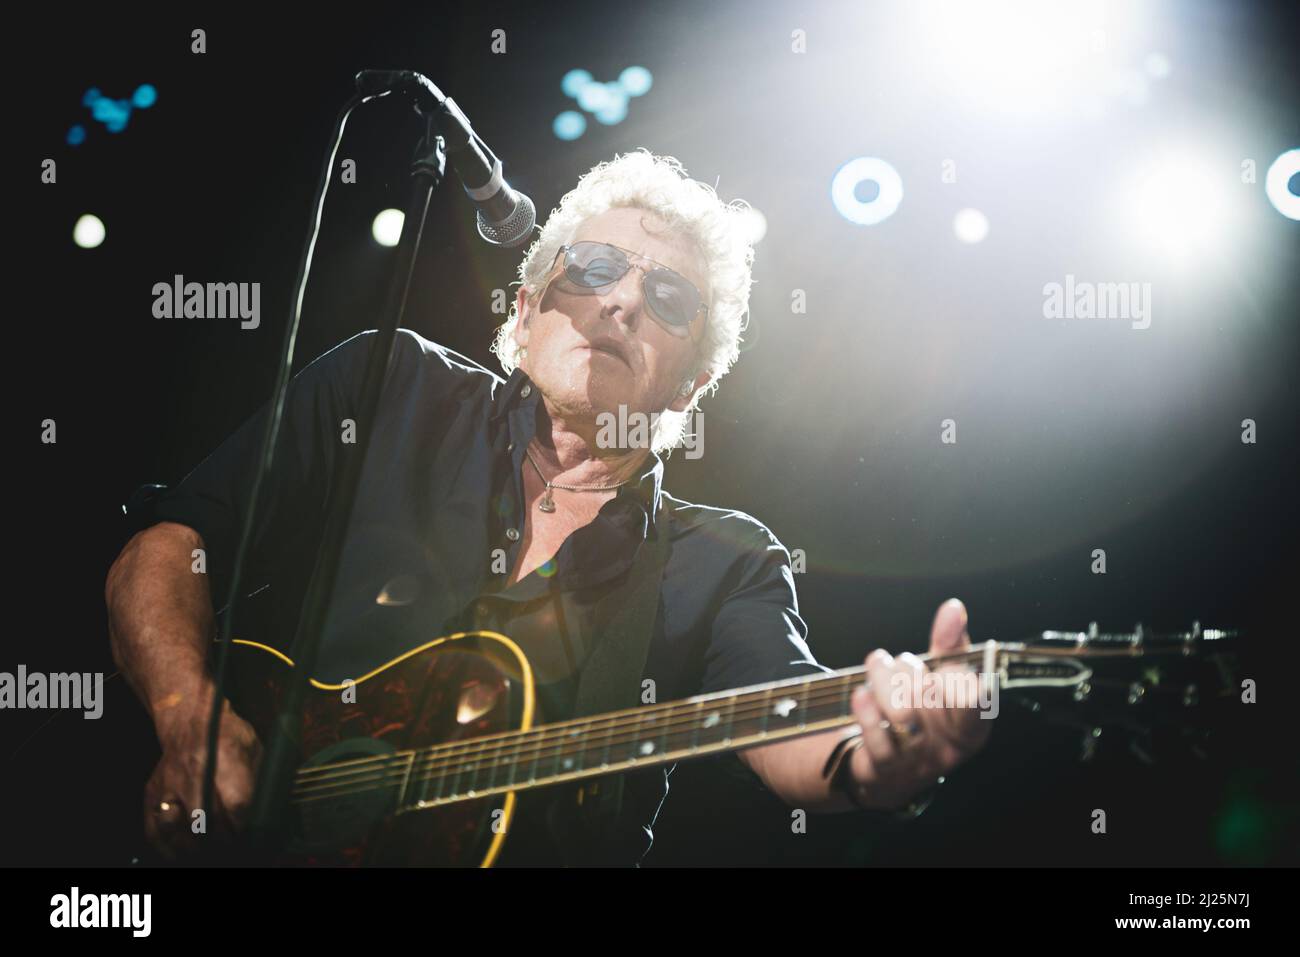 ITALY, BOLOGNA, UNIPOL ARENA 2016: Roger Daltrey, singer of the British rock band “The Who”, performing live on stage for the “Back to the Who” European tour Stock Photo